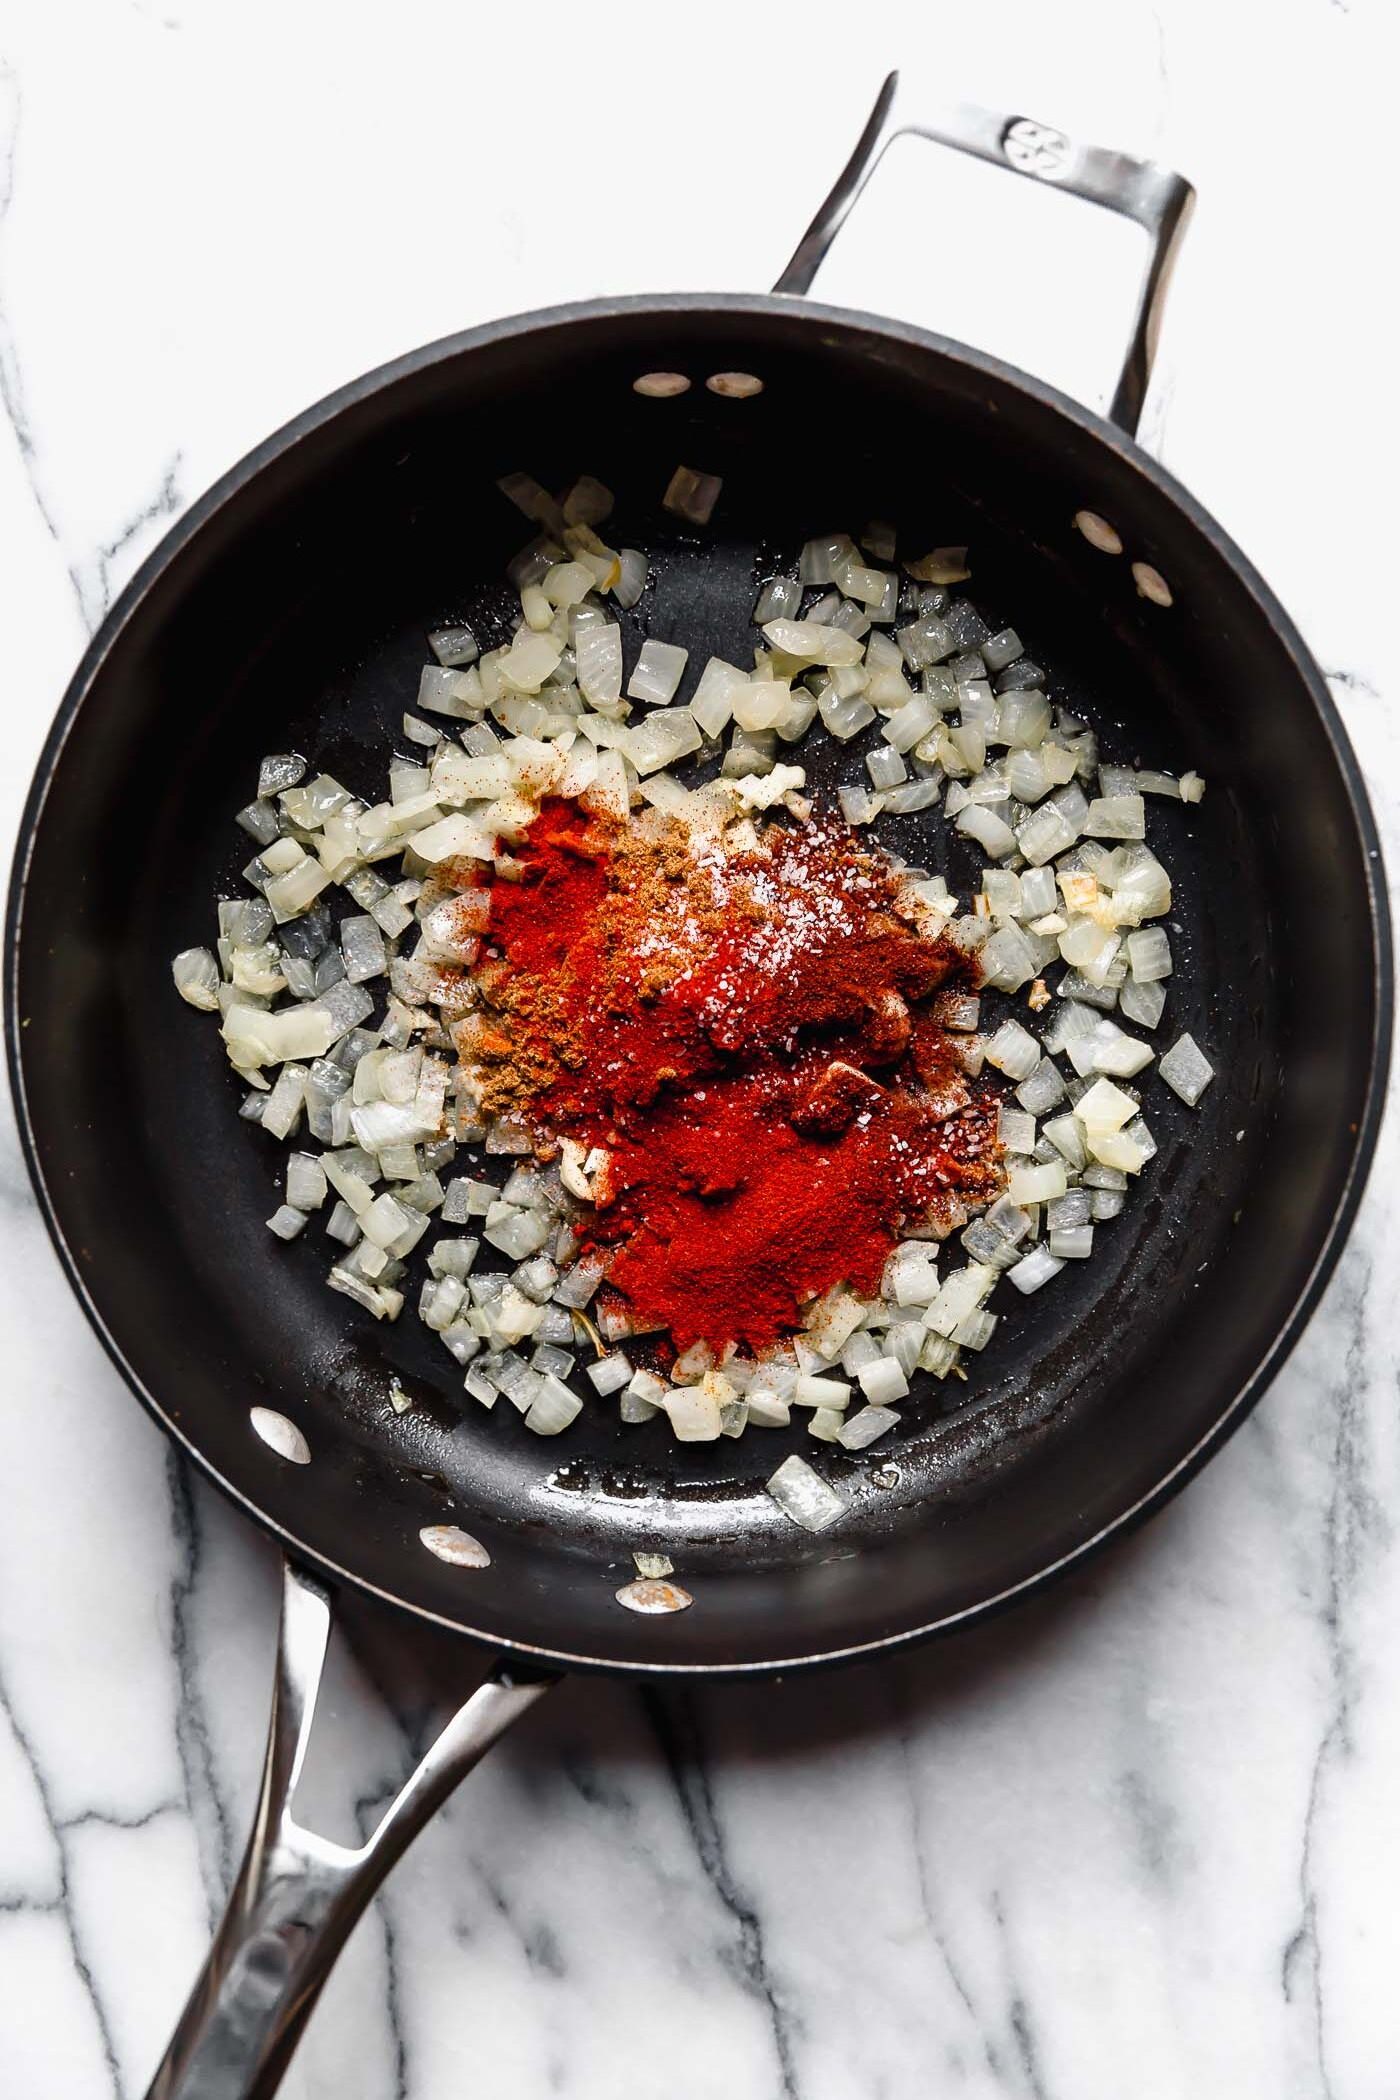 Softened onion shown in a black skillet, topped with a taco spice blend. The skillet sits atop a white marble surface.